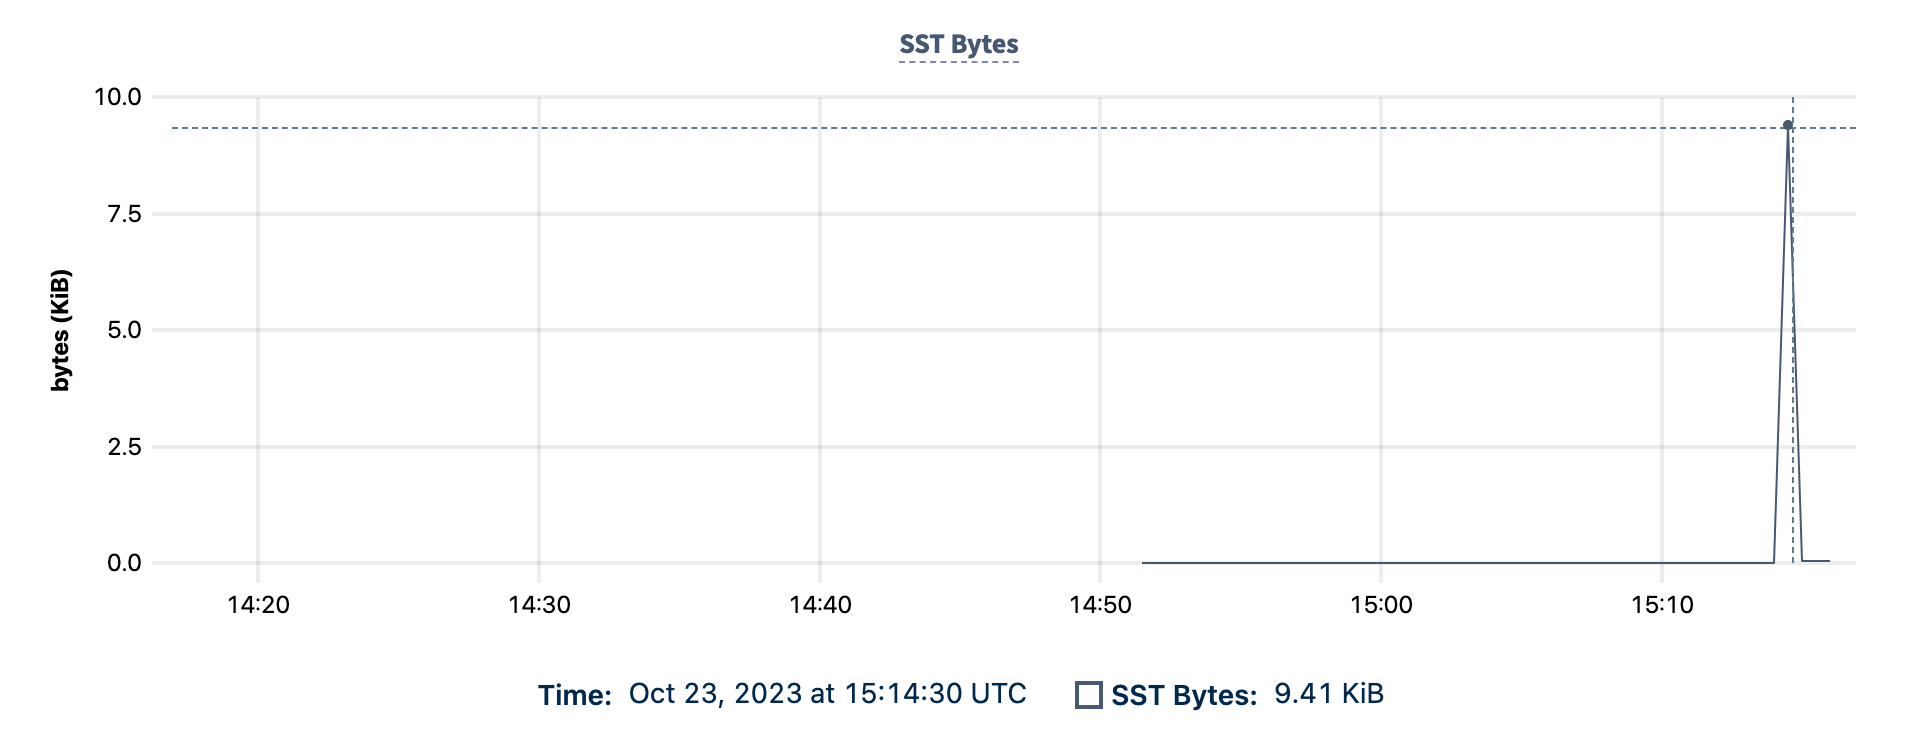 DB Console SST bytes graph showing results over the past hour